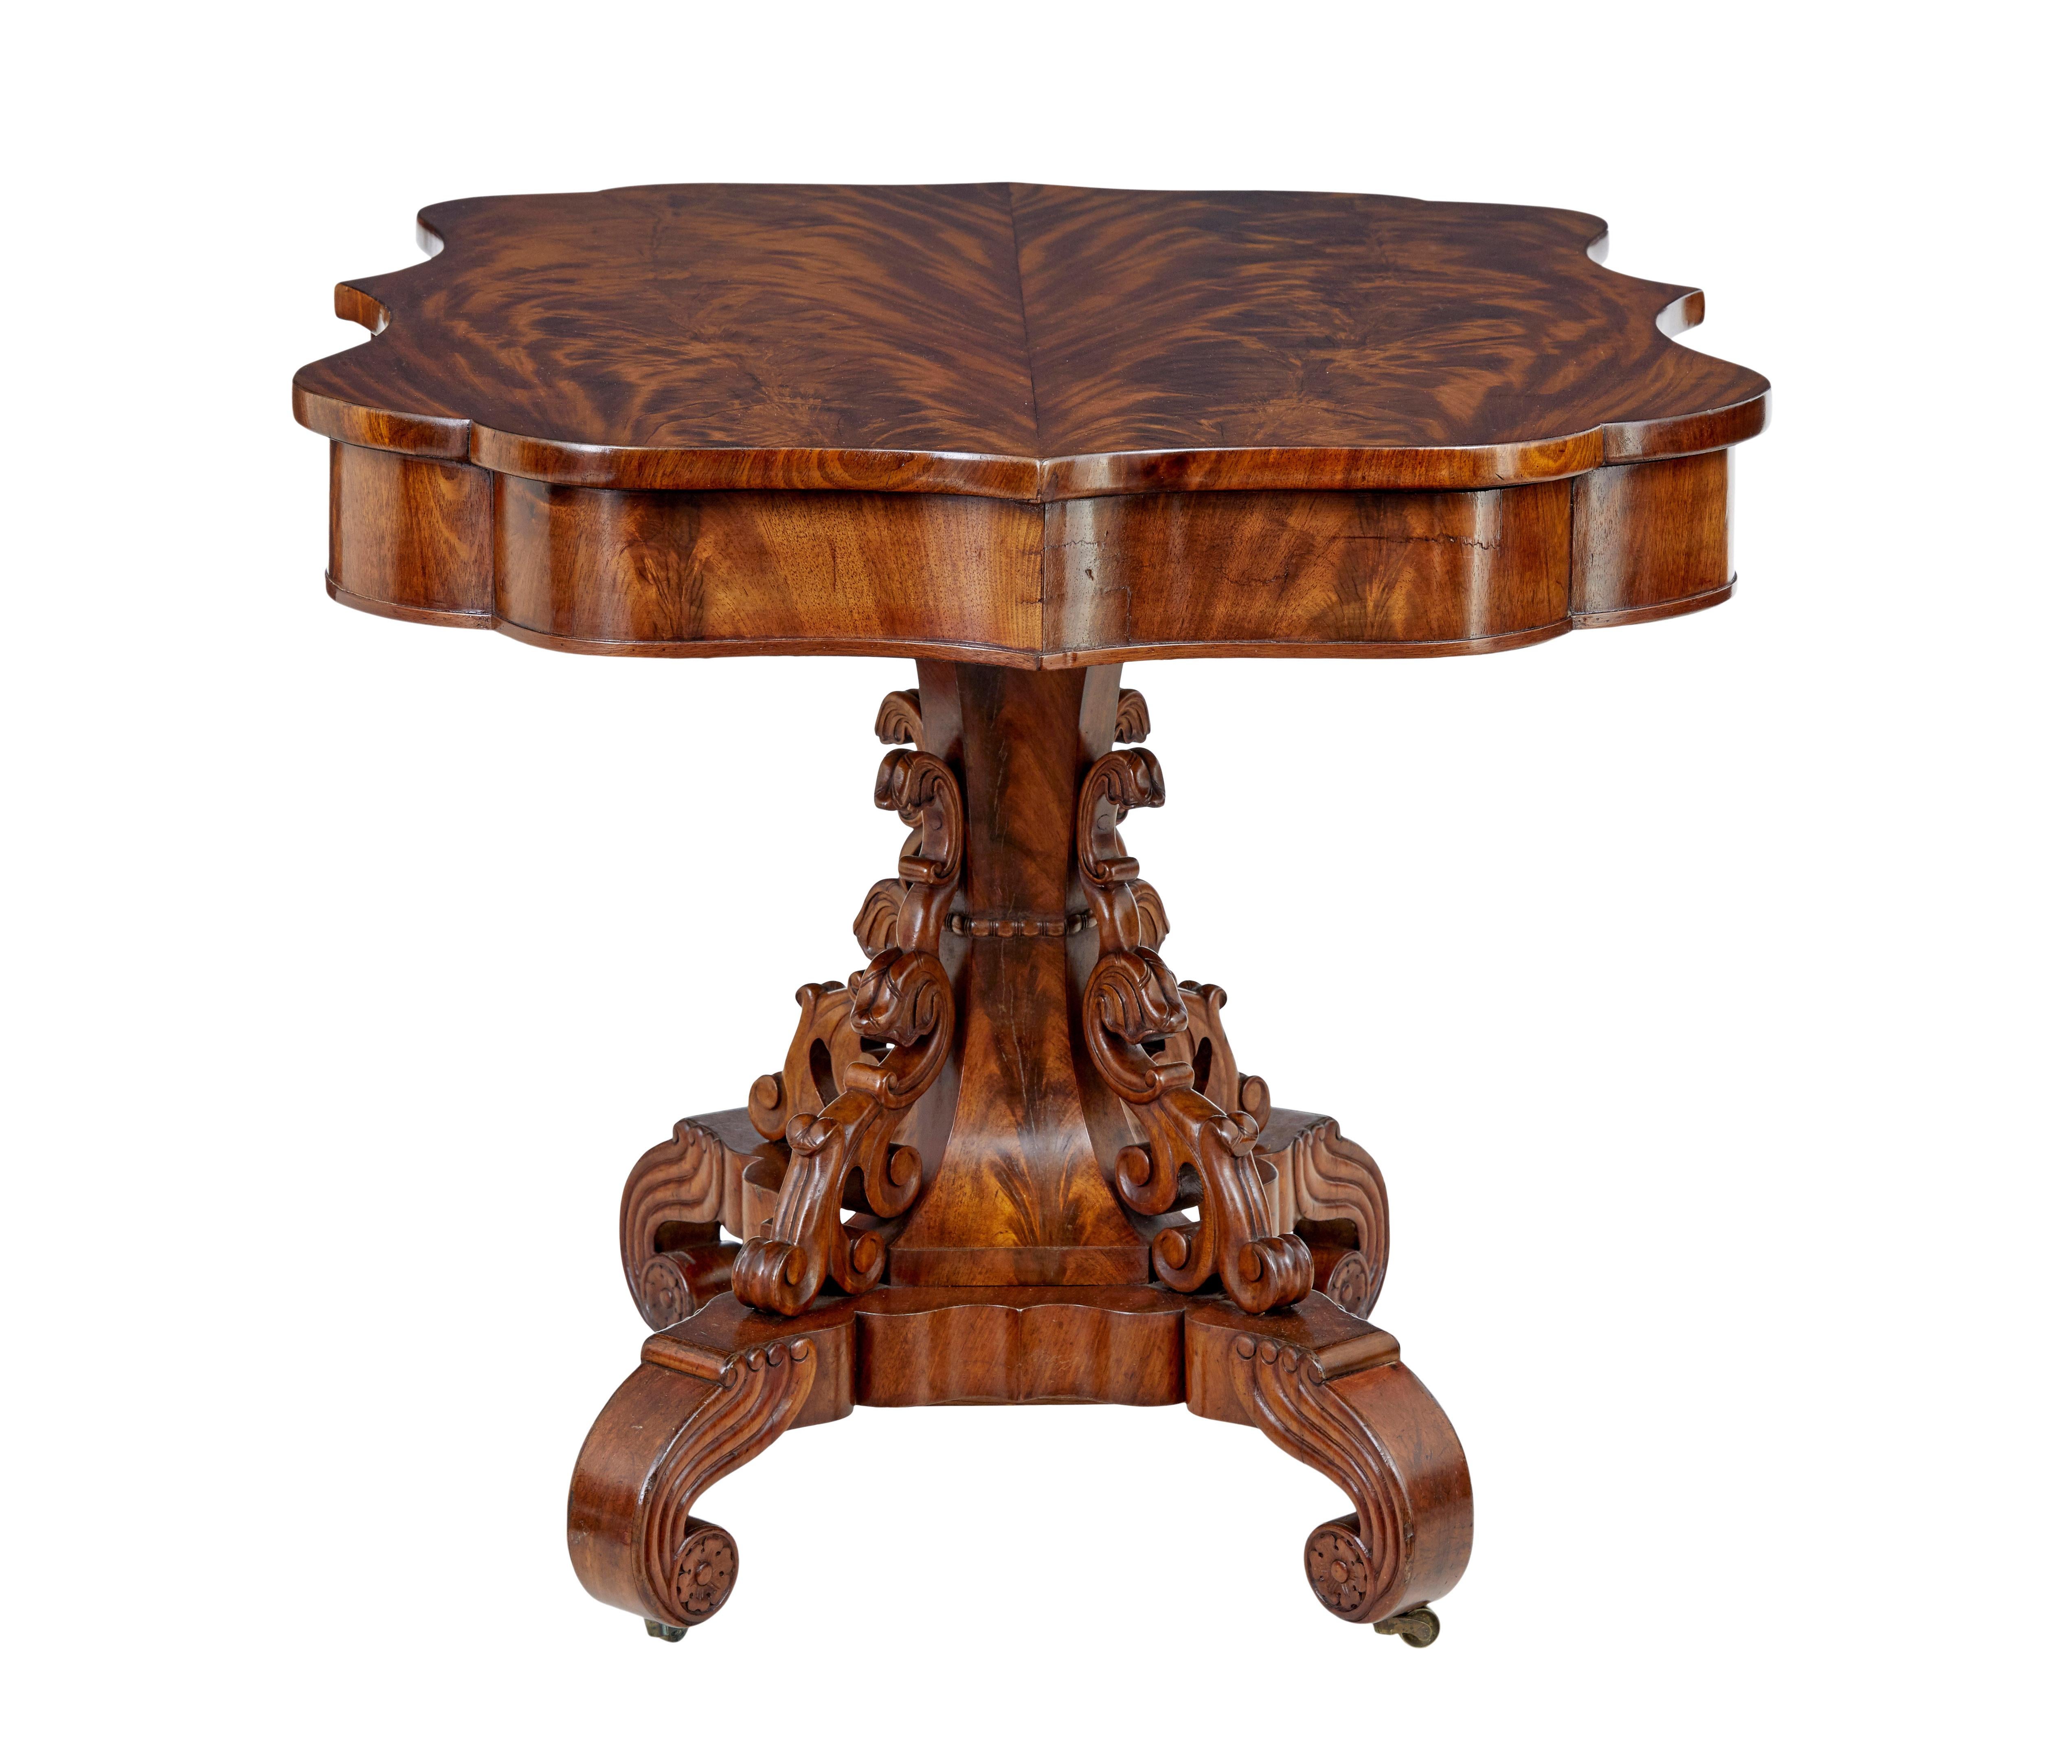 Rococo Revival 19th Century Danish Carved Flame Mahogany Center Table For Sale